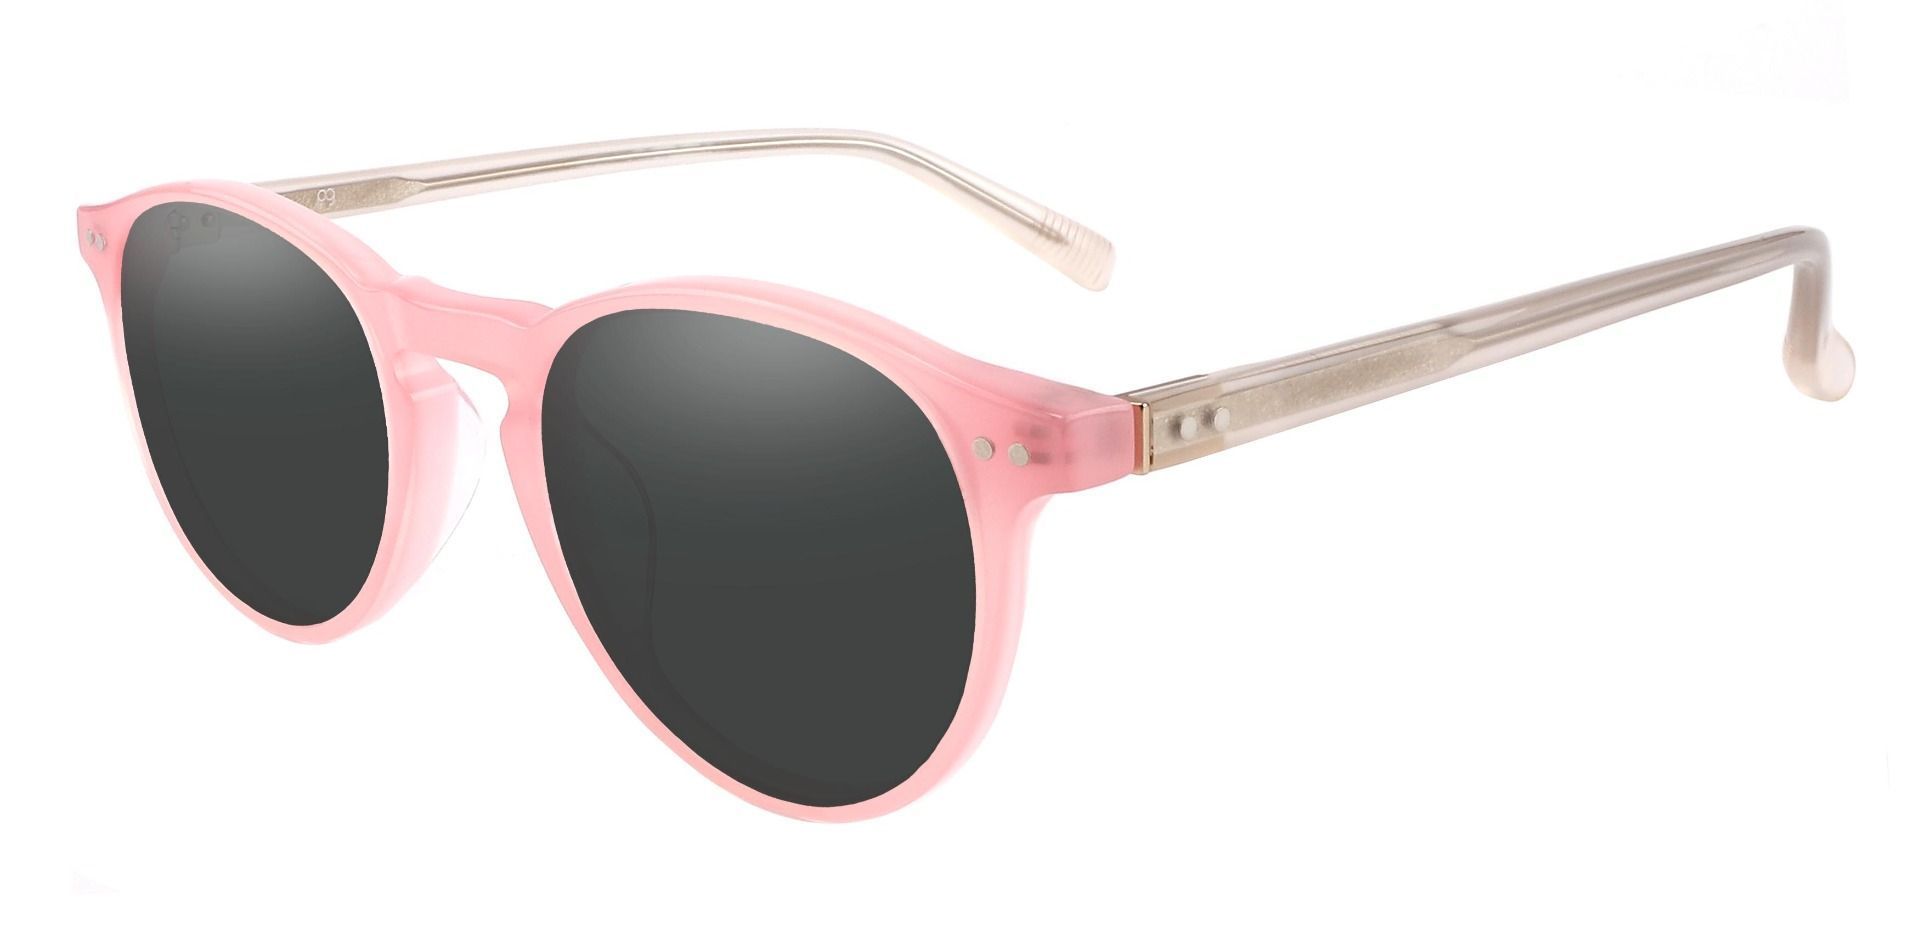 Monarch Oval Lined Bifocal Sunglasses - Pink Frame With Gray Lenses